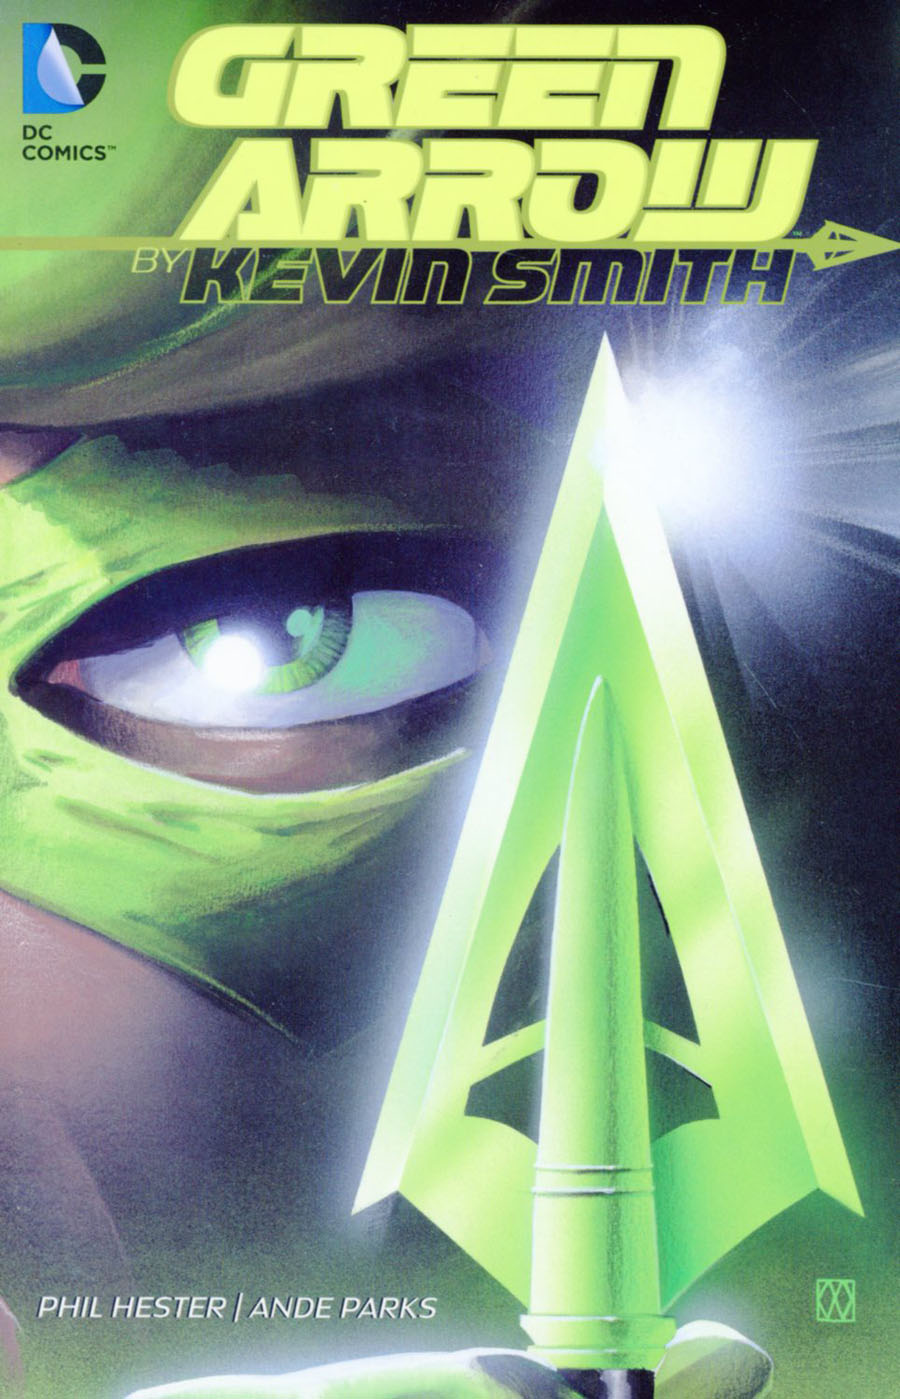 Green Arrow By Kevin Smith TP